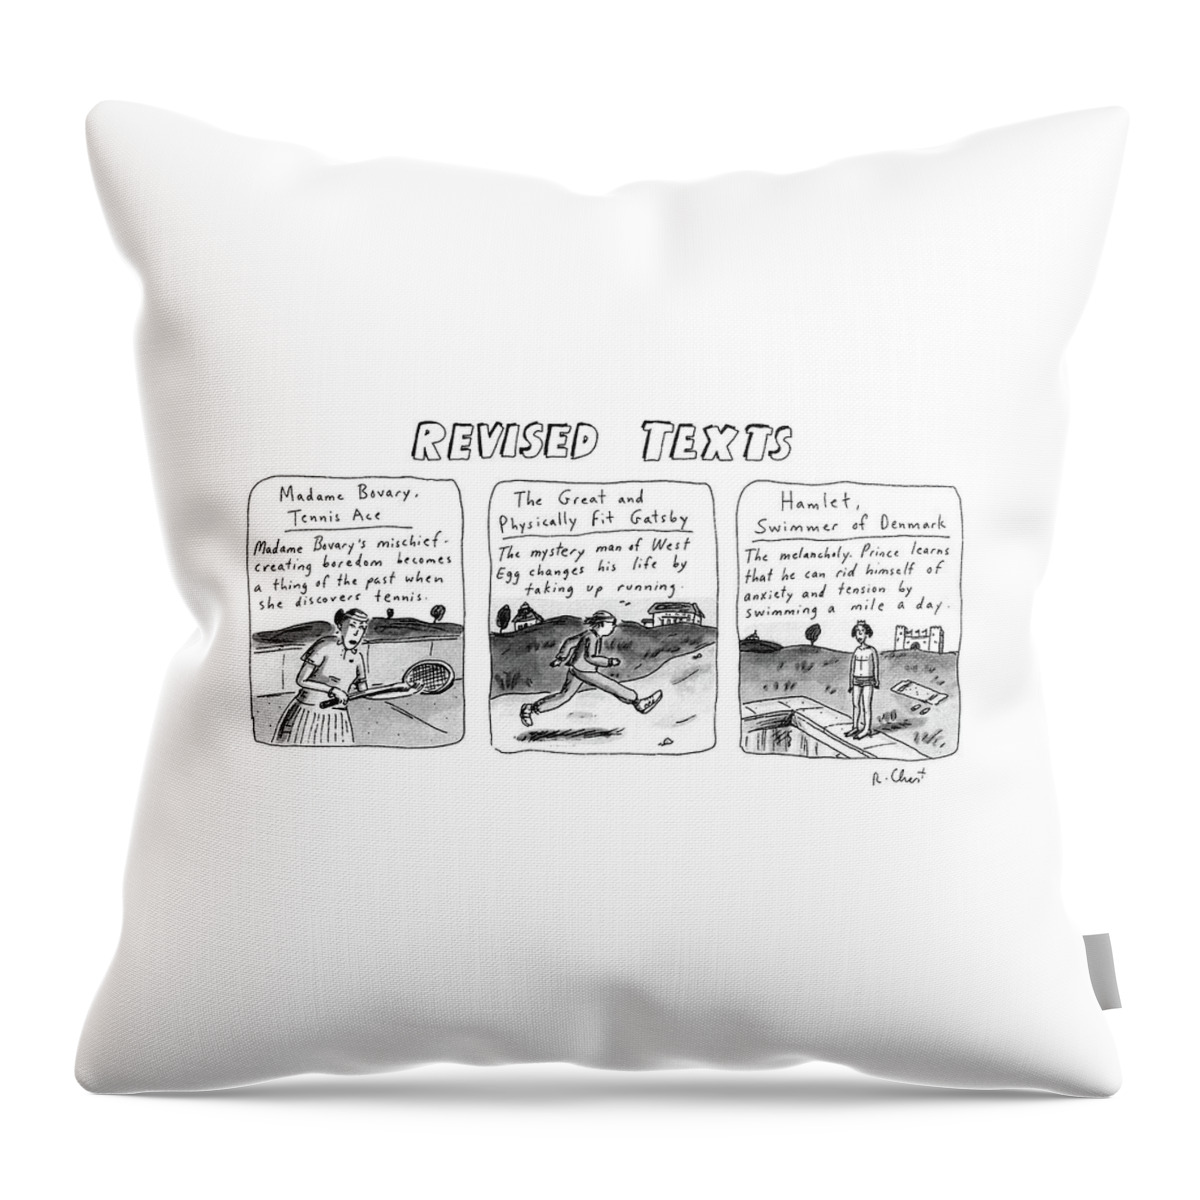 Revised Texts Throw Pillow